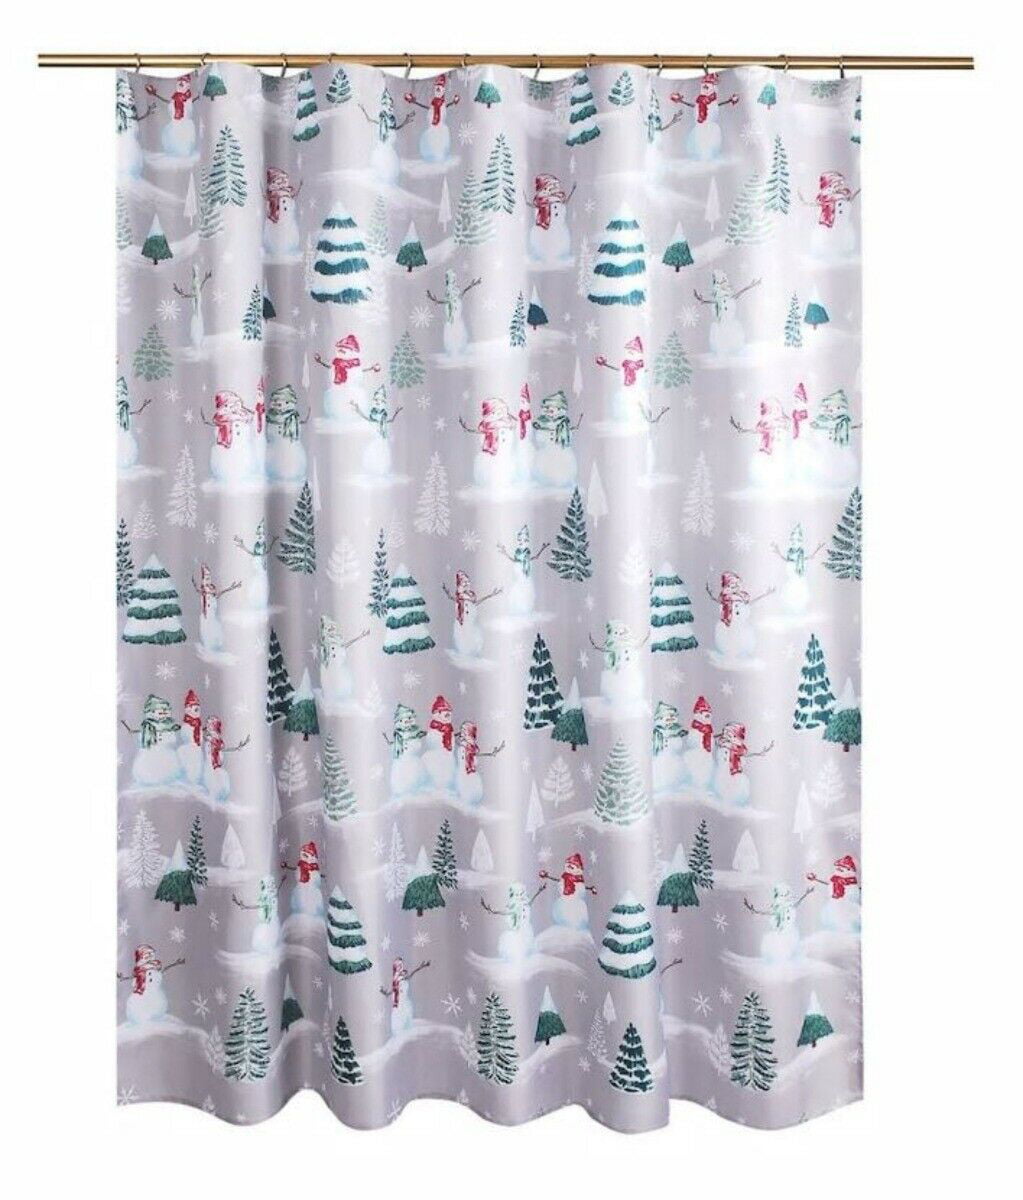 Blue Floral Garden Butterfly 100% Polyester NEW Lenox Printed Shower Curtain 